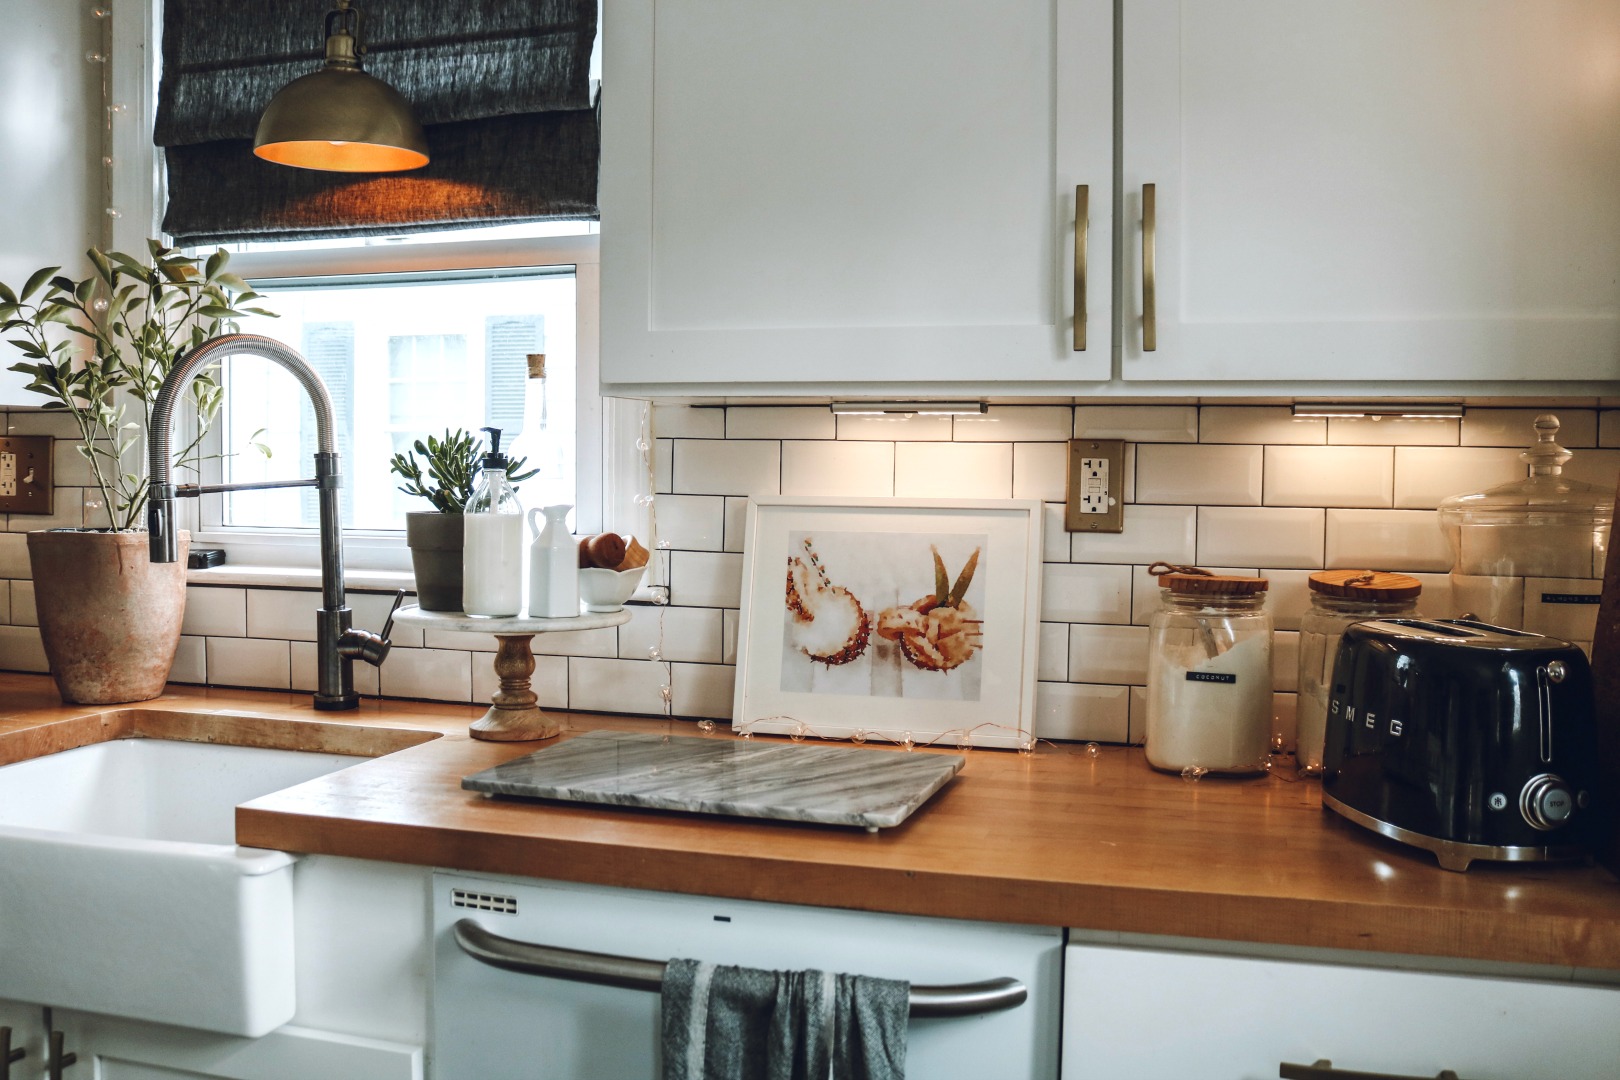 We Tested The Best Under-Cabinet Lighting to Illuminate a Kitchen